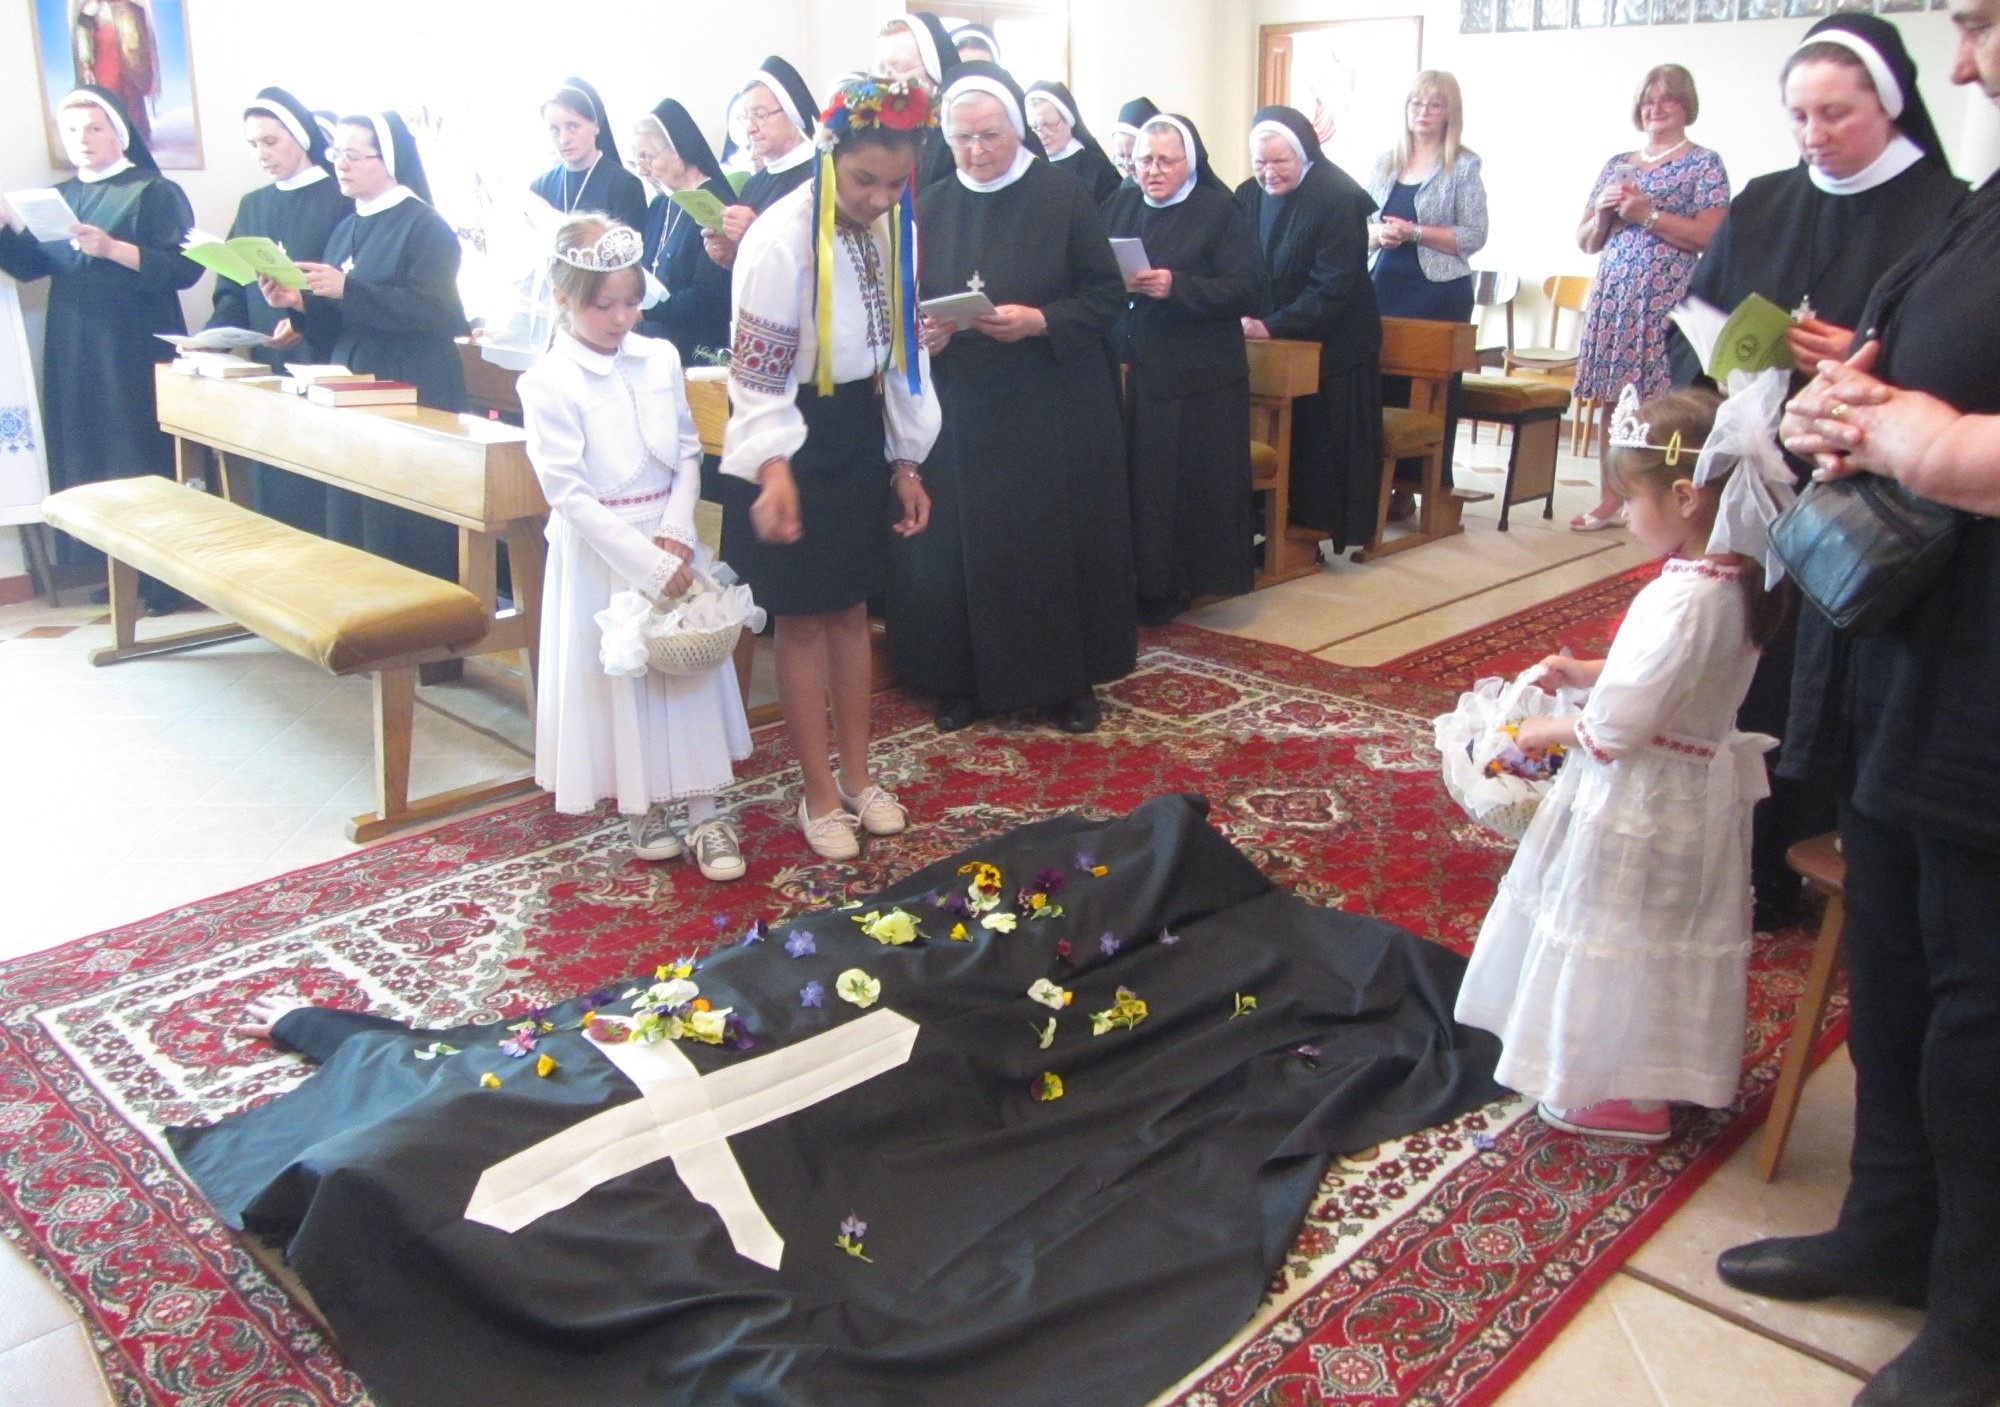 In a Byzantine Rite tradition, Sr. Teodozija Mostepaniuk is covered with a black cloth as a symbol of her death to the world as she makes her final profession as a Sister of the Order of St. Basil the Great (Province of St. Michael the Archangel, Croatia), placing her hand on the Gospel on April 29, 2018, in Osijek, Croatia. (Courtesy of Teodozija Mostepaniuk)